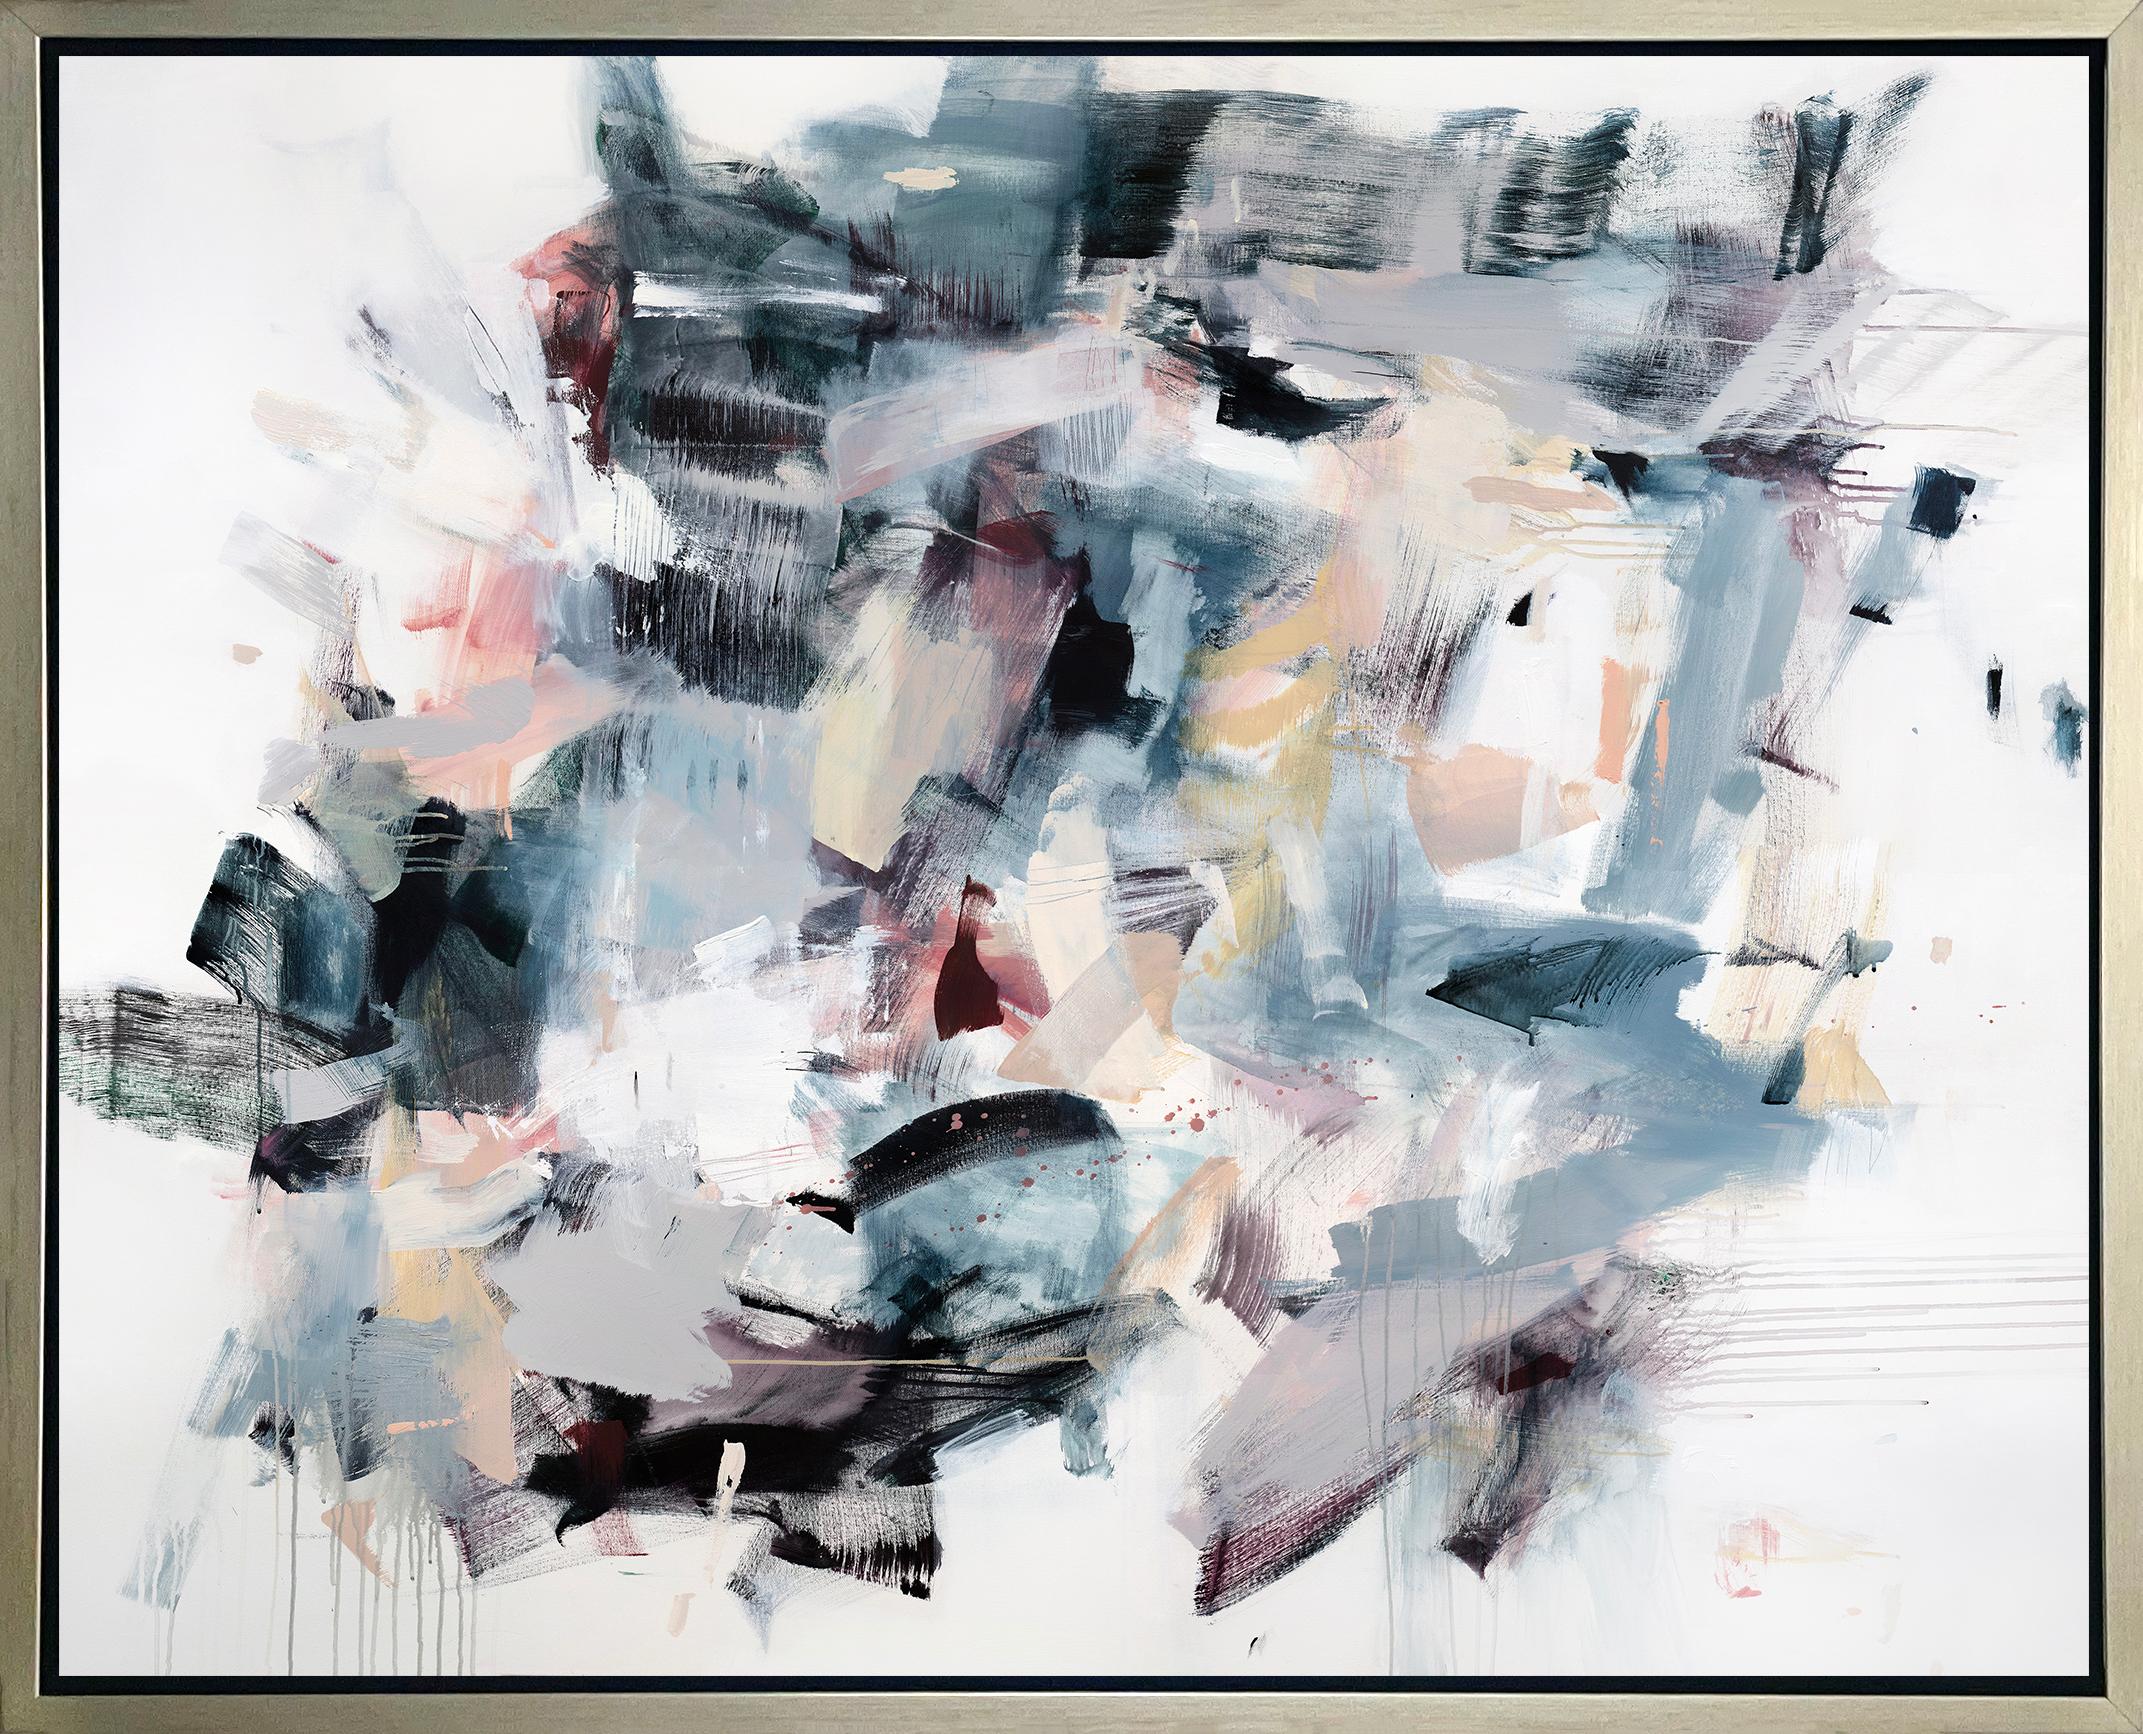 Kelly Rossetti Abstract Print - "Serotonin Overflow, " Framed Limited Edition Giclee Print, 16" x 20"